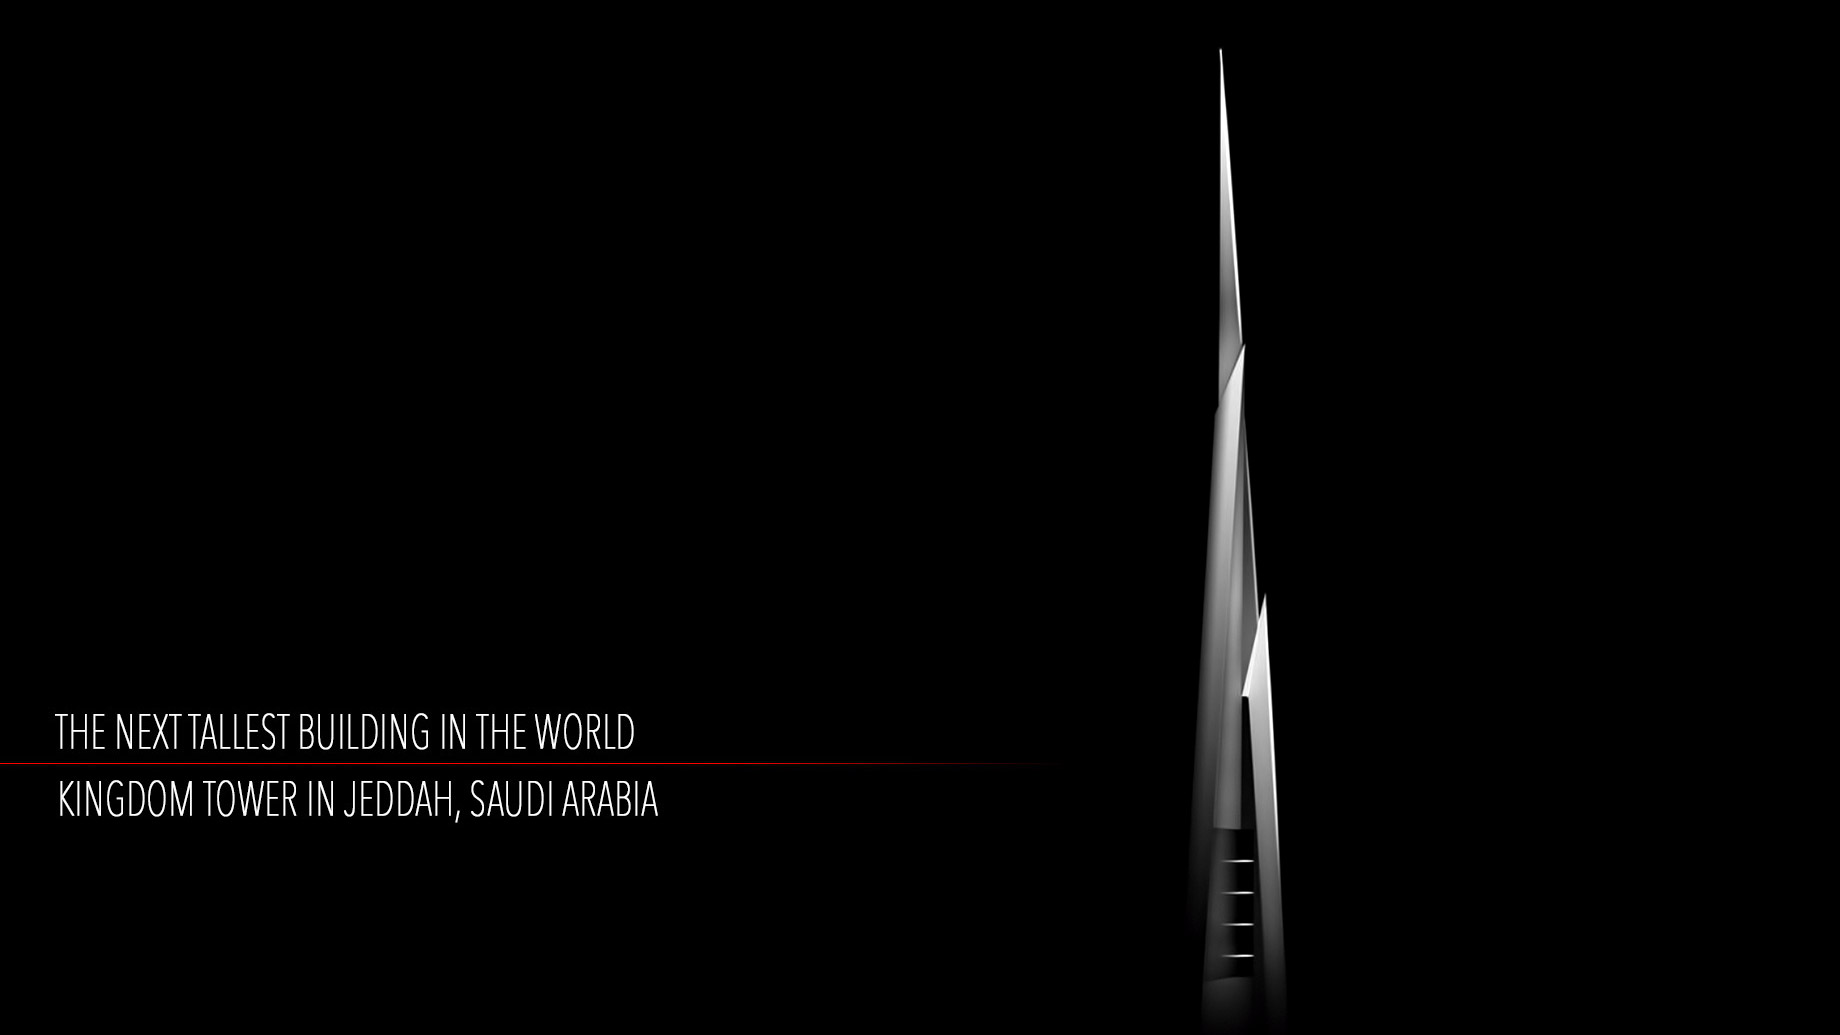 The Next Tallest Building in the World – Kingdom Tower in Jeddah, Saudi Arabia